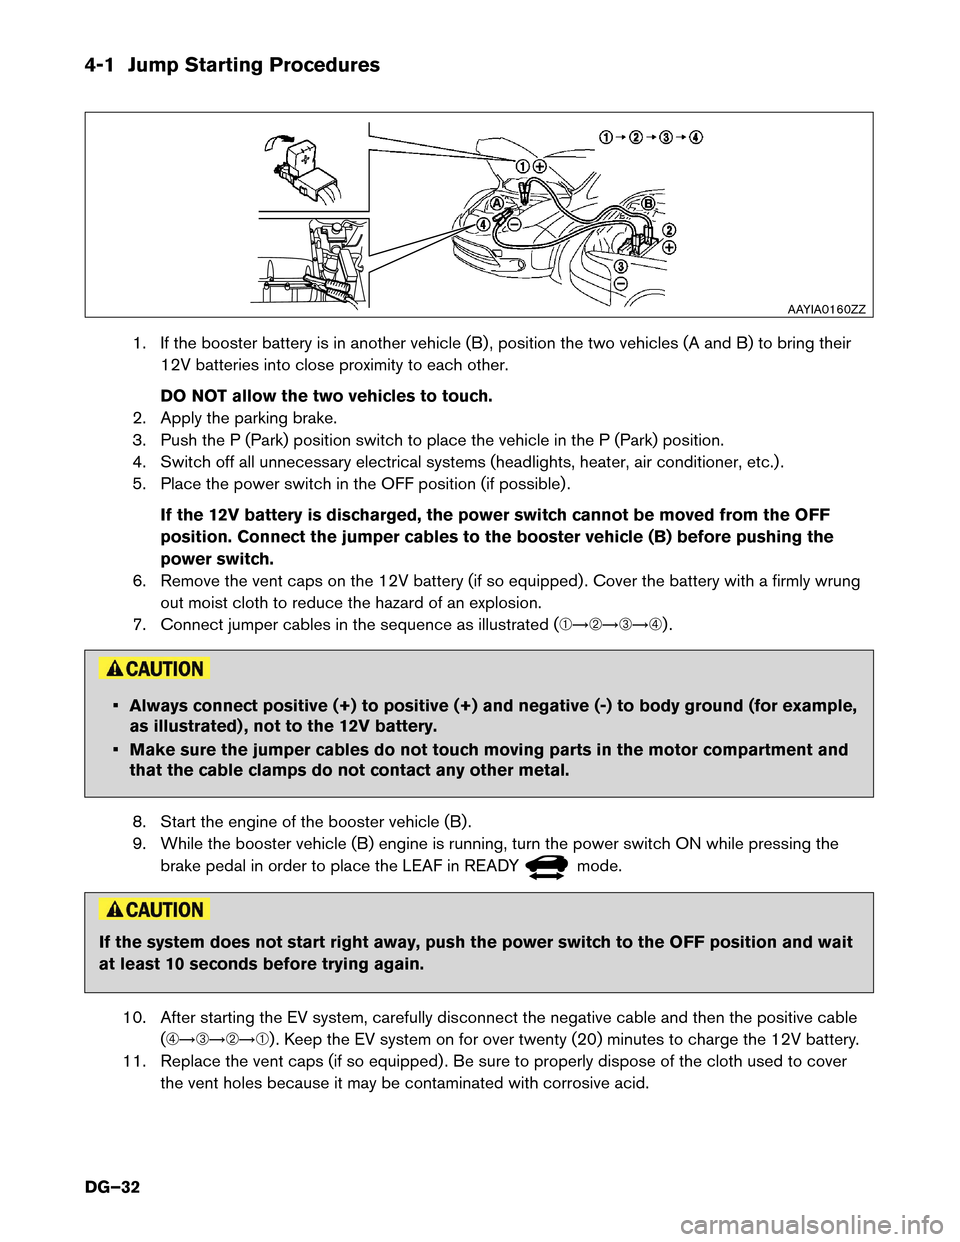 NISSAN LEAF 2014 1.G Dismantling Guide 4-1 Jump Starting Procedures
1. If the booster battery is in another vehicle (B) , position the two vehicles (A and B) to bring their
12V batteries into close proximity to each other.
DO NOT allow the